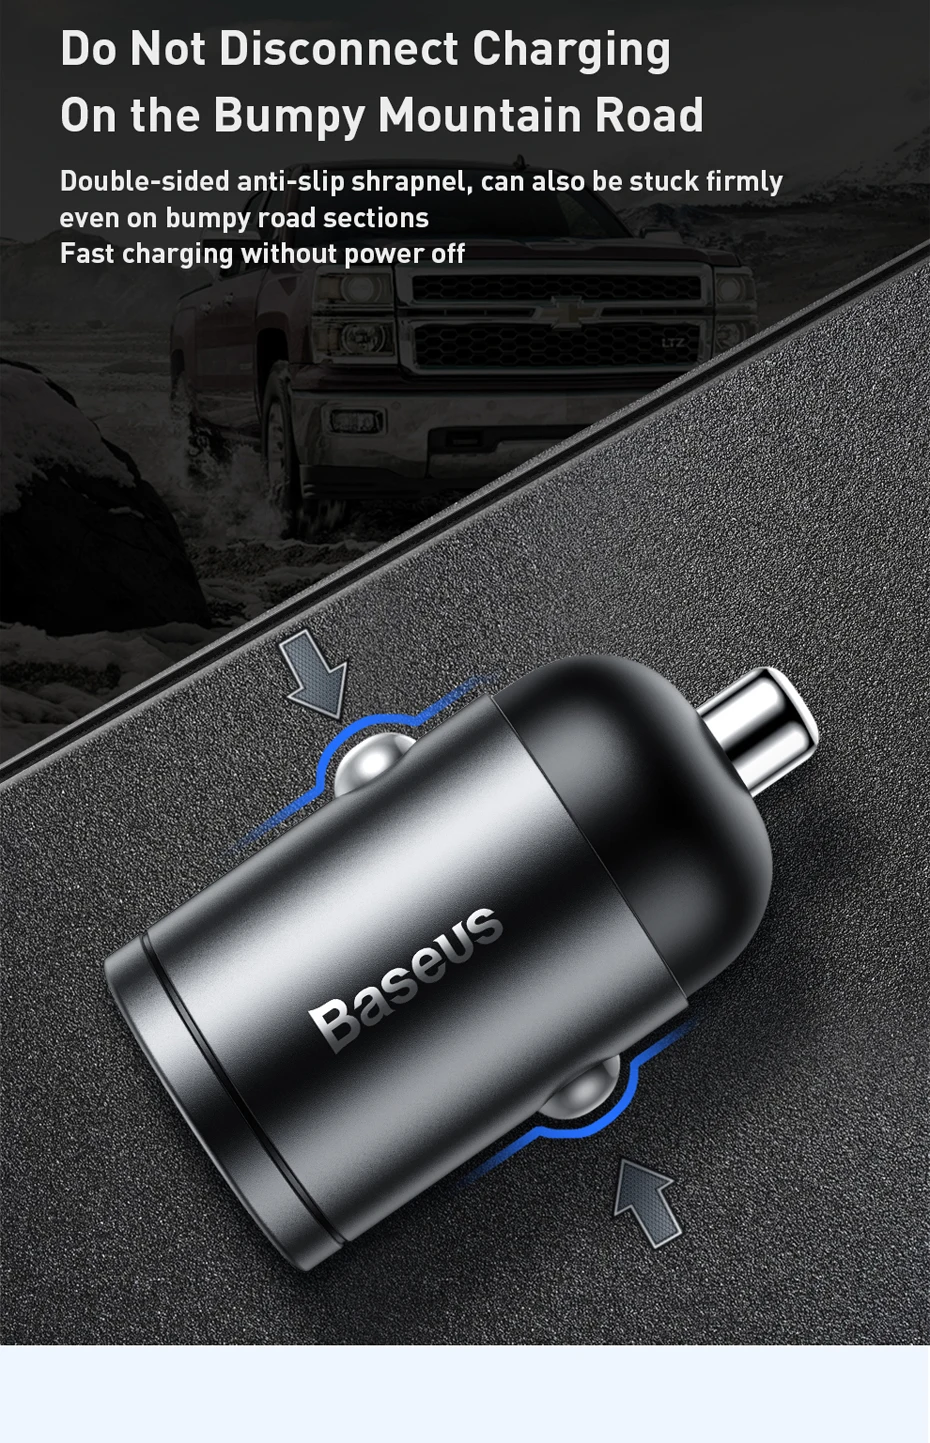 Baseus Car Charger Type-C Quick Charge 4.0 3.0 For Iphone Huawei Xiaomi Samsung PD 3.0 Fast Charging USB Phone Mini Charger 65w charger